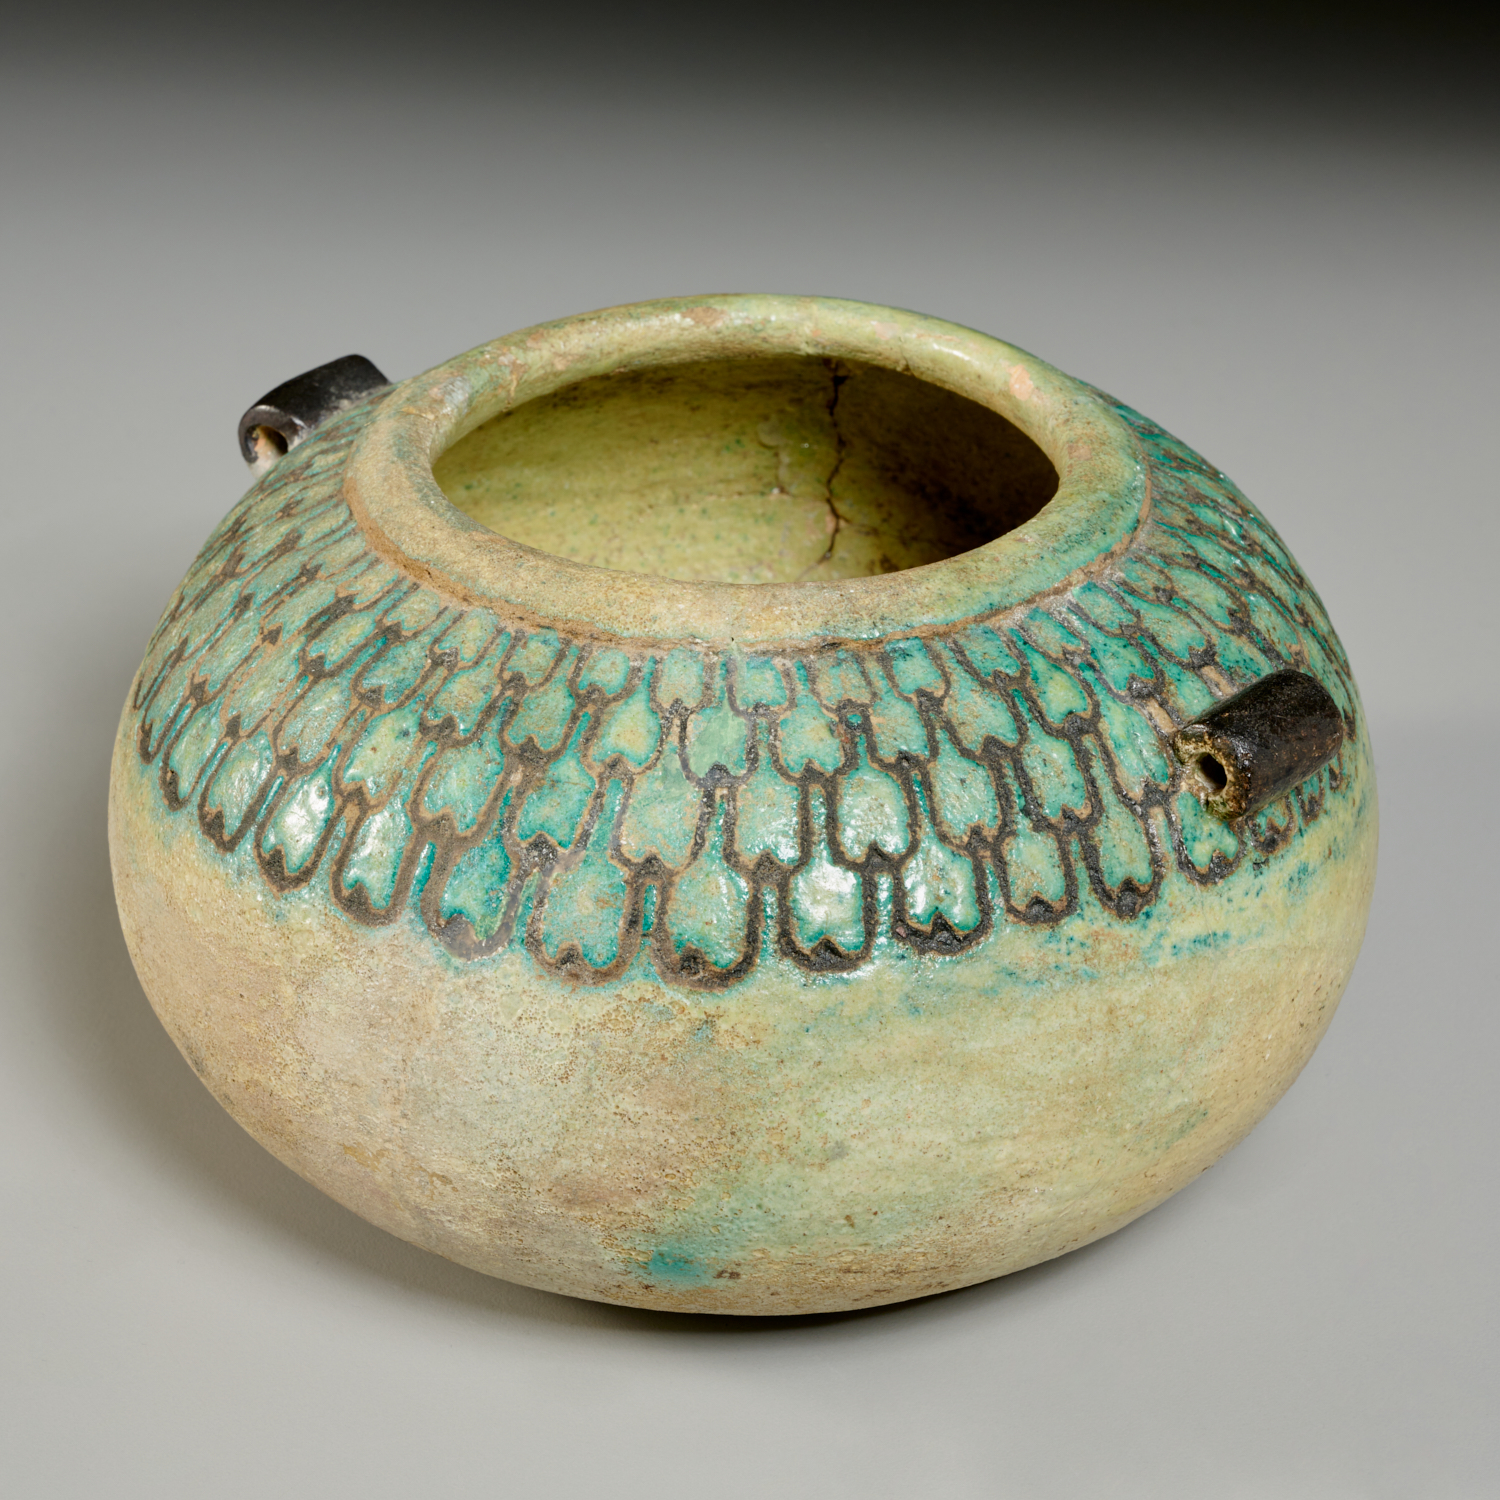 EGYPTIAN FAIENCE BOWL likely Roman 2bf647